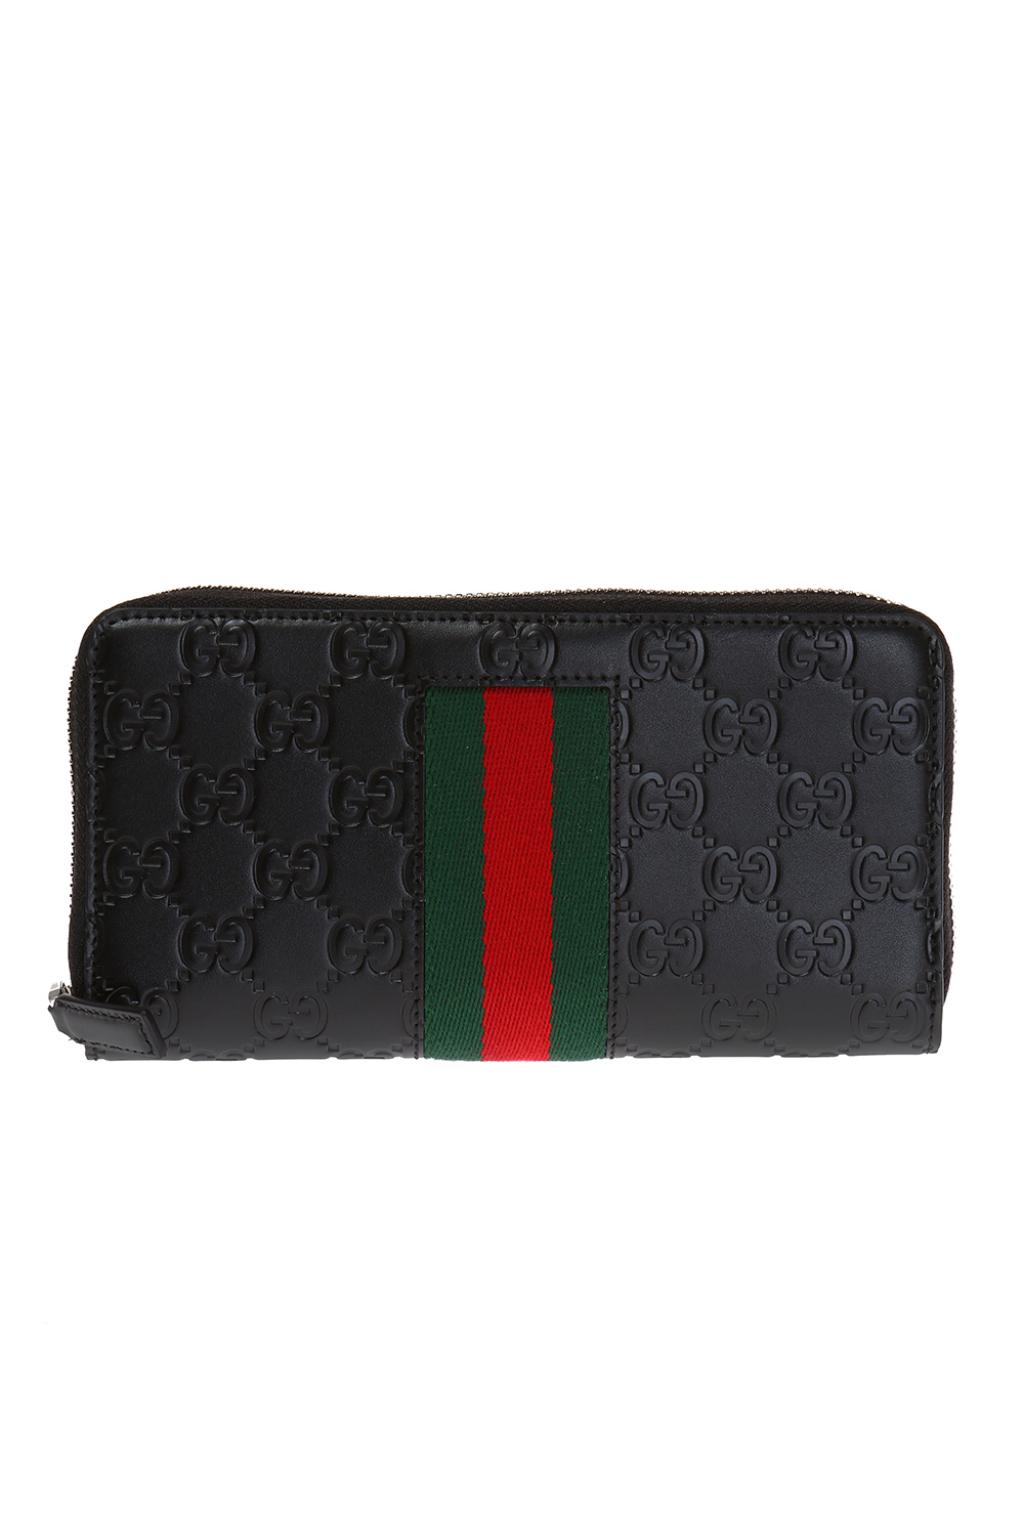 GUCCI Embossed Wallet Black RED green STRIPE Leather 459138 NEW